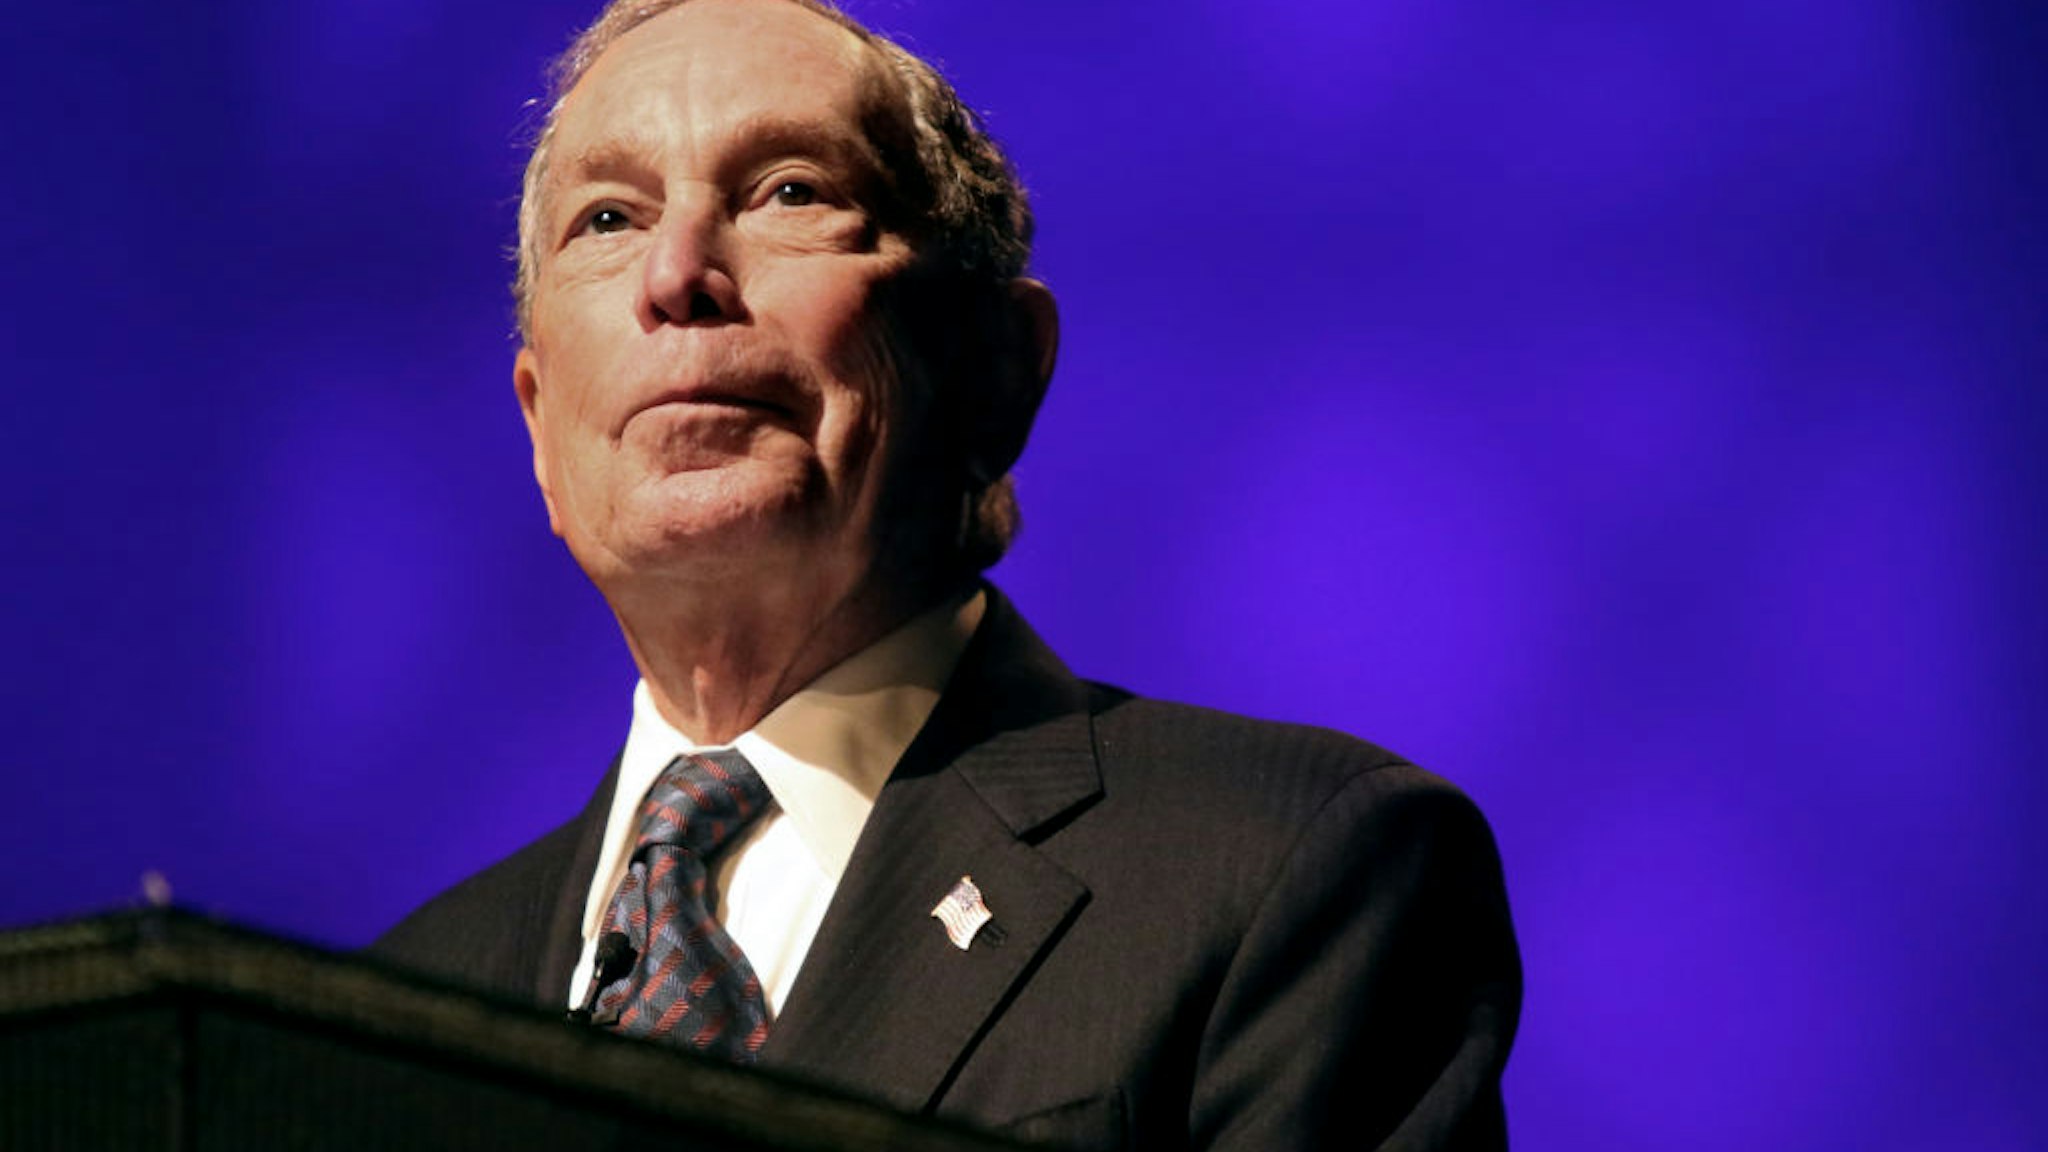 Michael Bloomberg speaks at the Christian Cultural Center